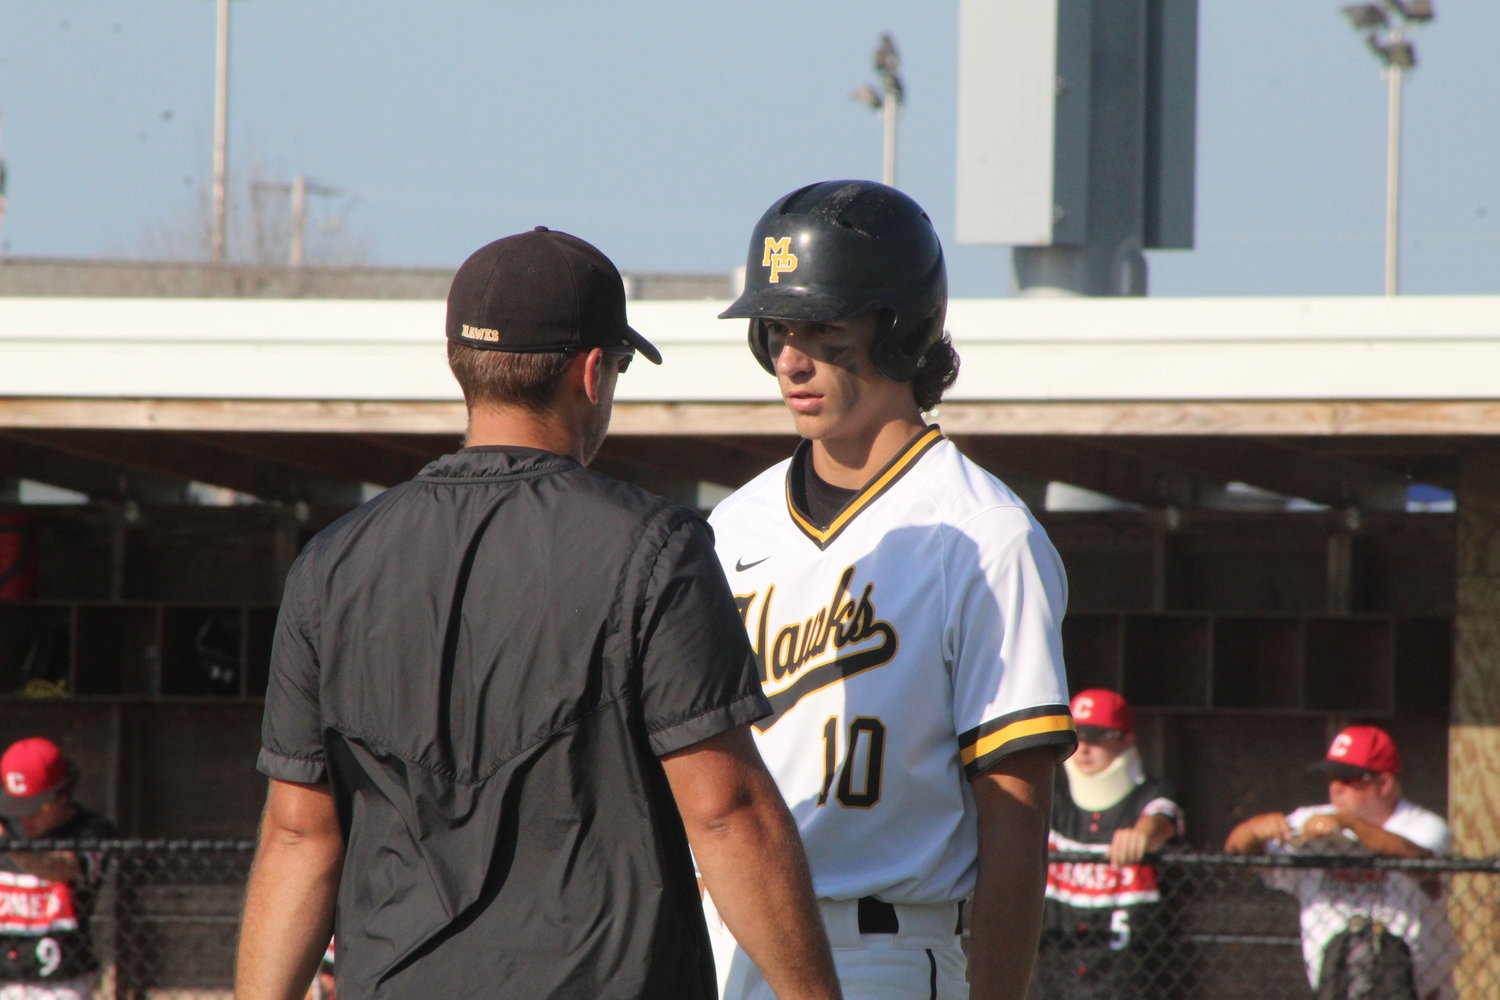 Mid-Prairie head coach Kyle Mullet instructs Collin Miller prior to an at-bat in a recent game.